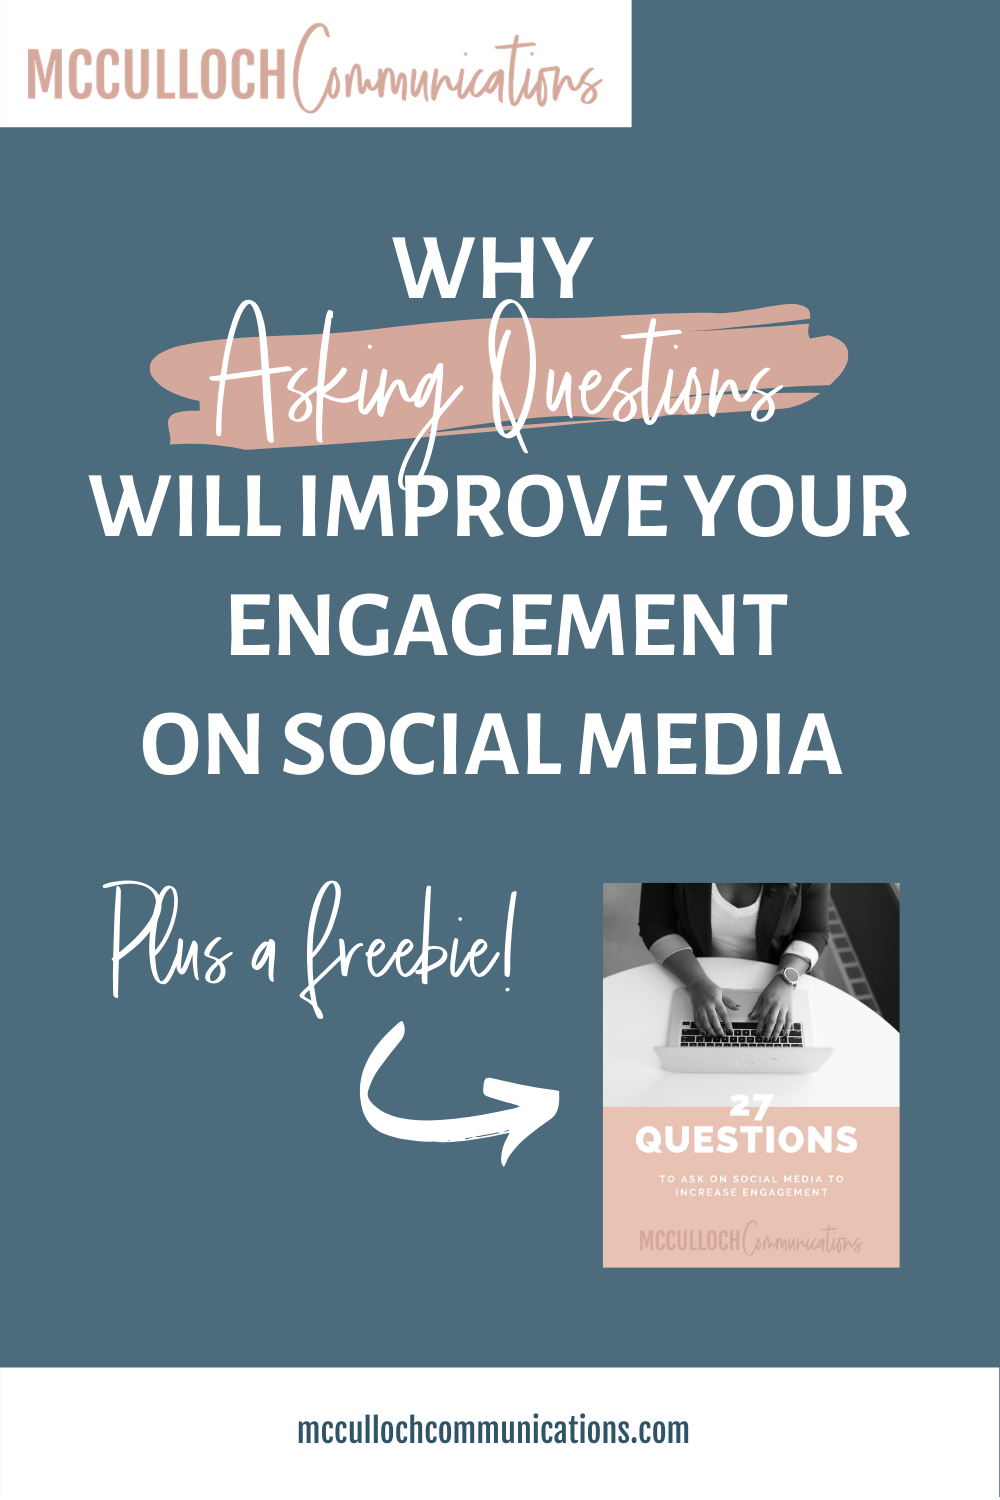 Why asking questions will improve your social media